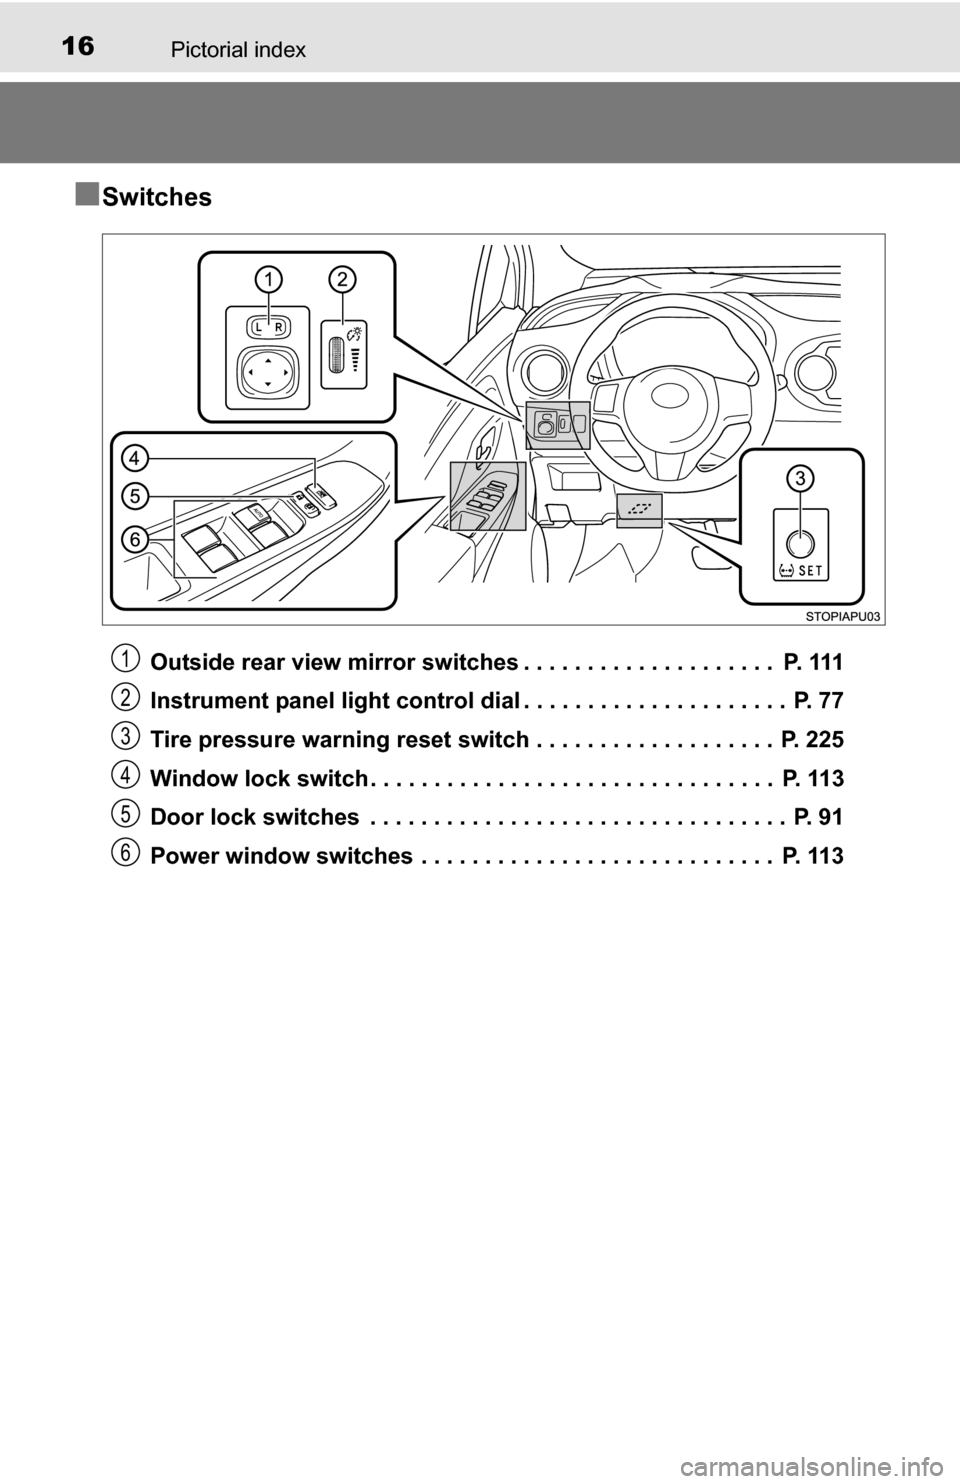 TOYOTA YARIS 2016 3.G Owners Manual 16Pictorial index
■Switches
Outside rear view mirror switches . . . . . . . . . . . . . . . . . . . .  P. 111
Instrument panel light control dial . . . . . . . . . . . . . . . . . . . . .  P. 77
Tir